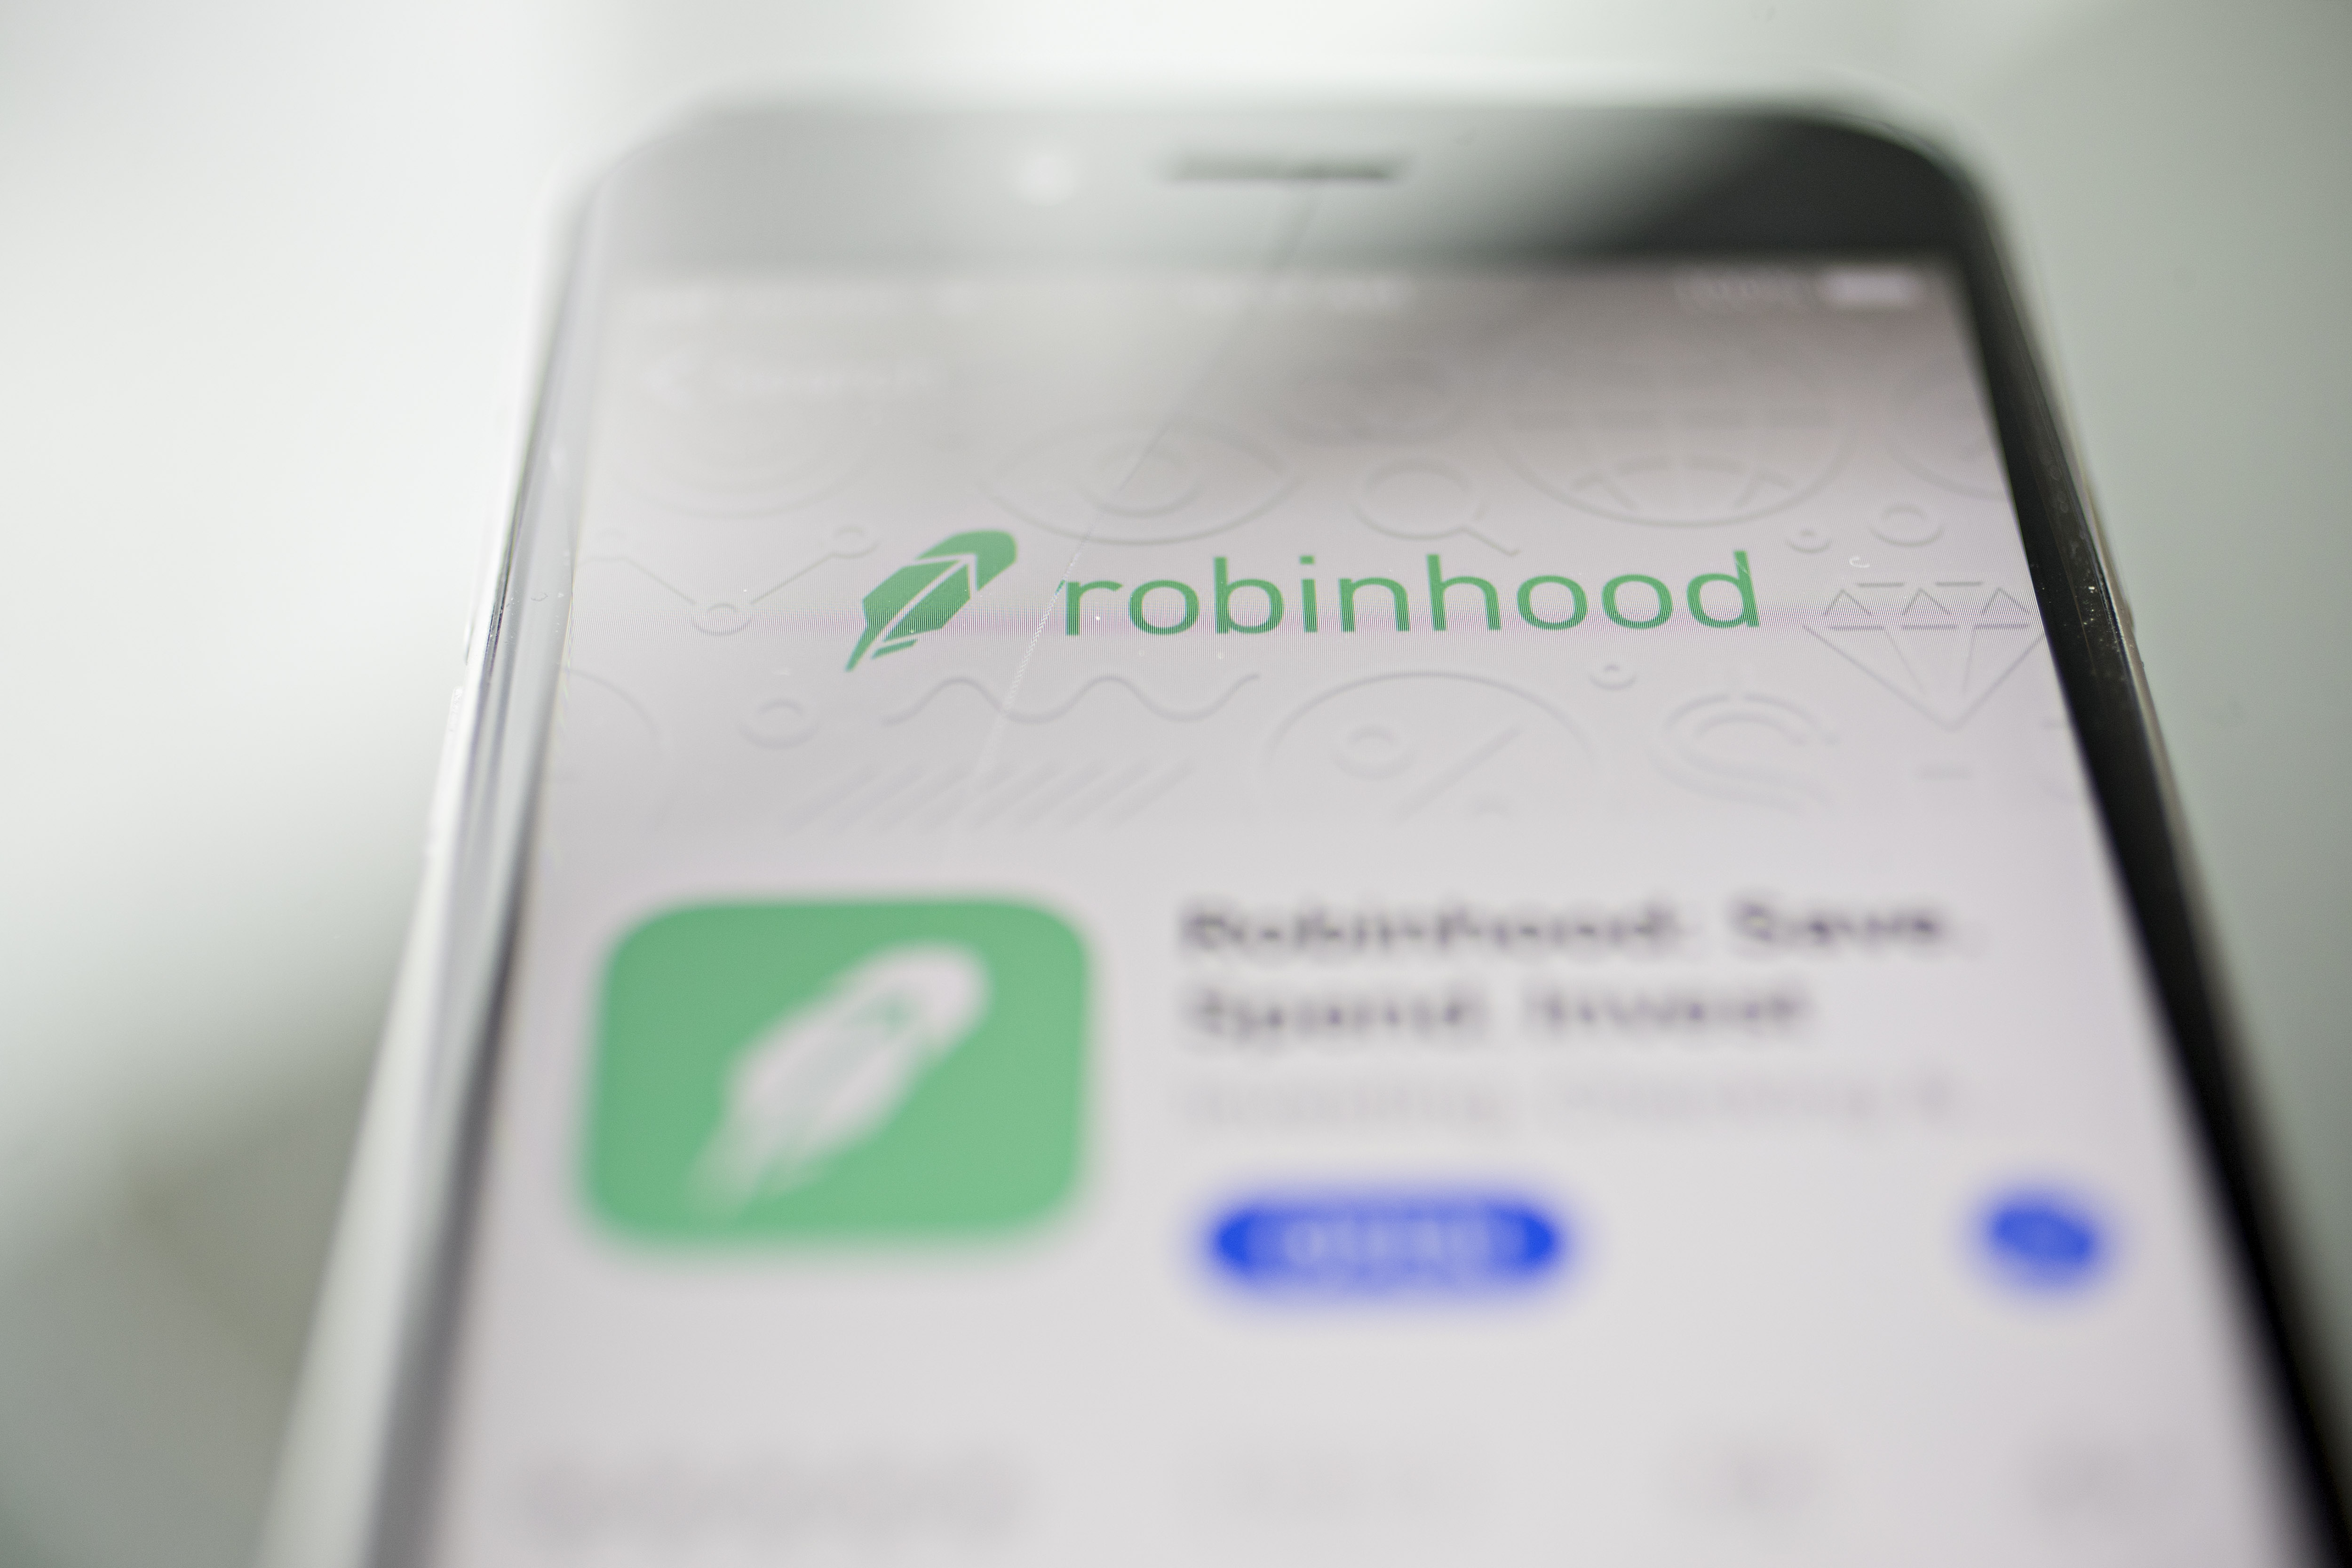 Robinhood Blows Past Rivals in Record Retail Trading Year - Bloomberg